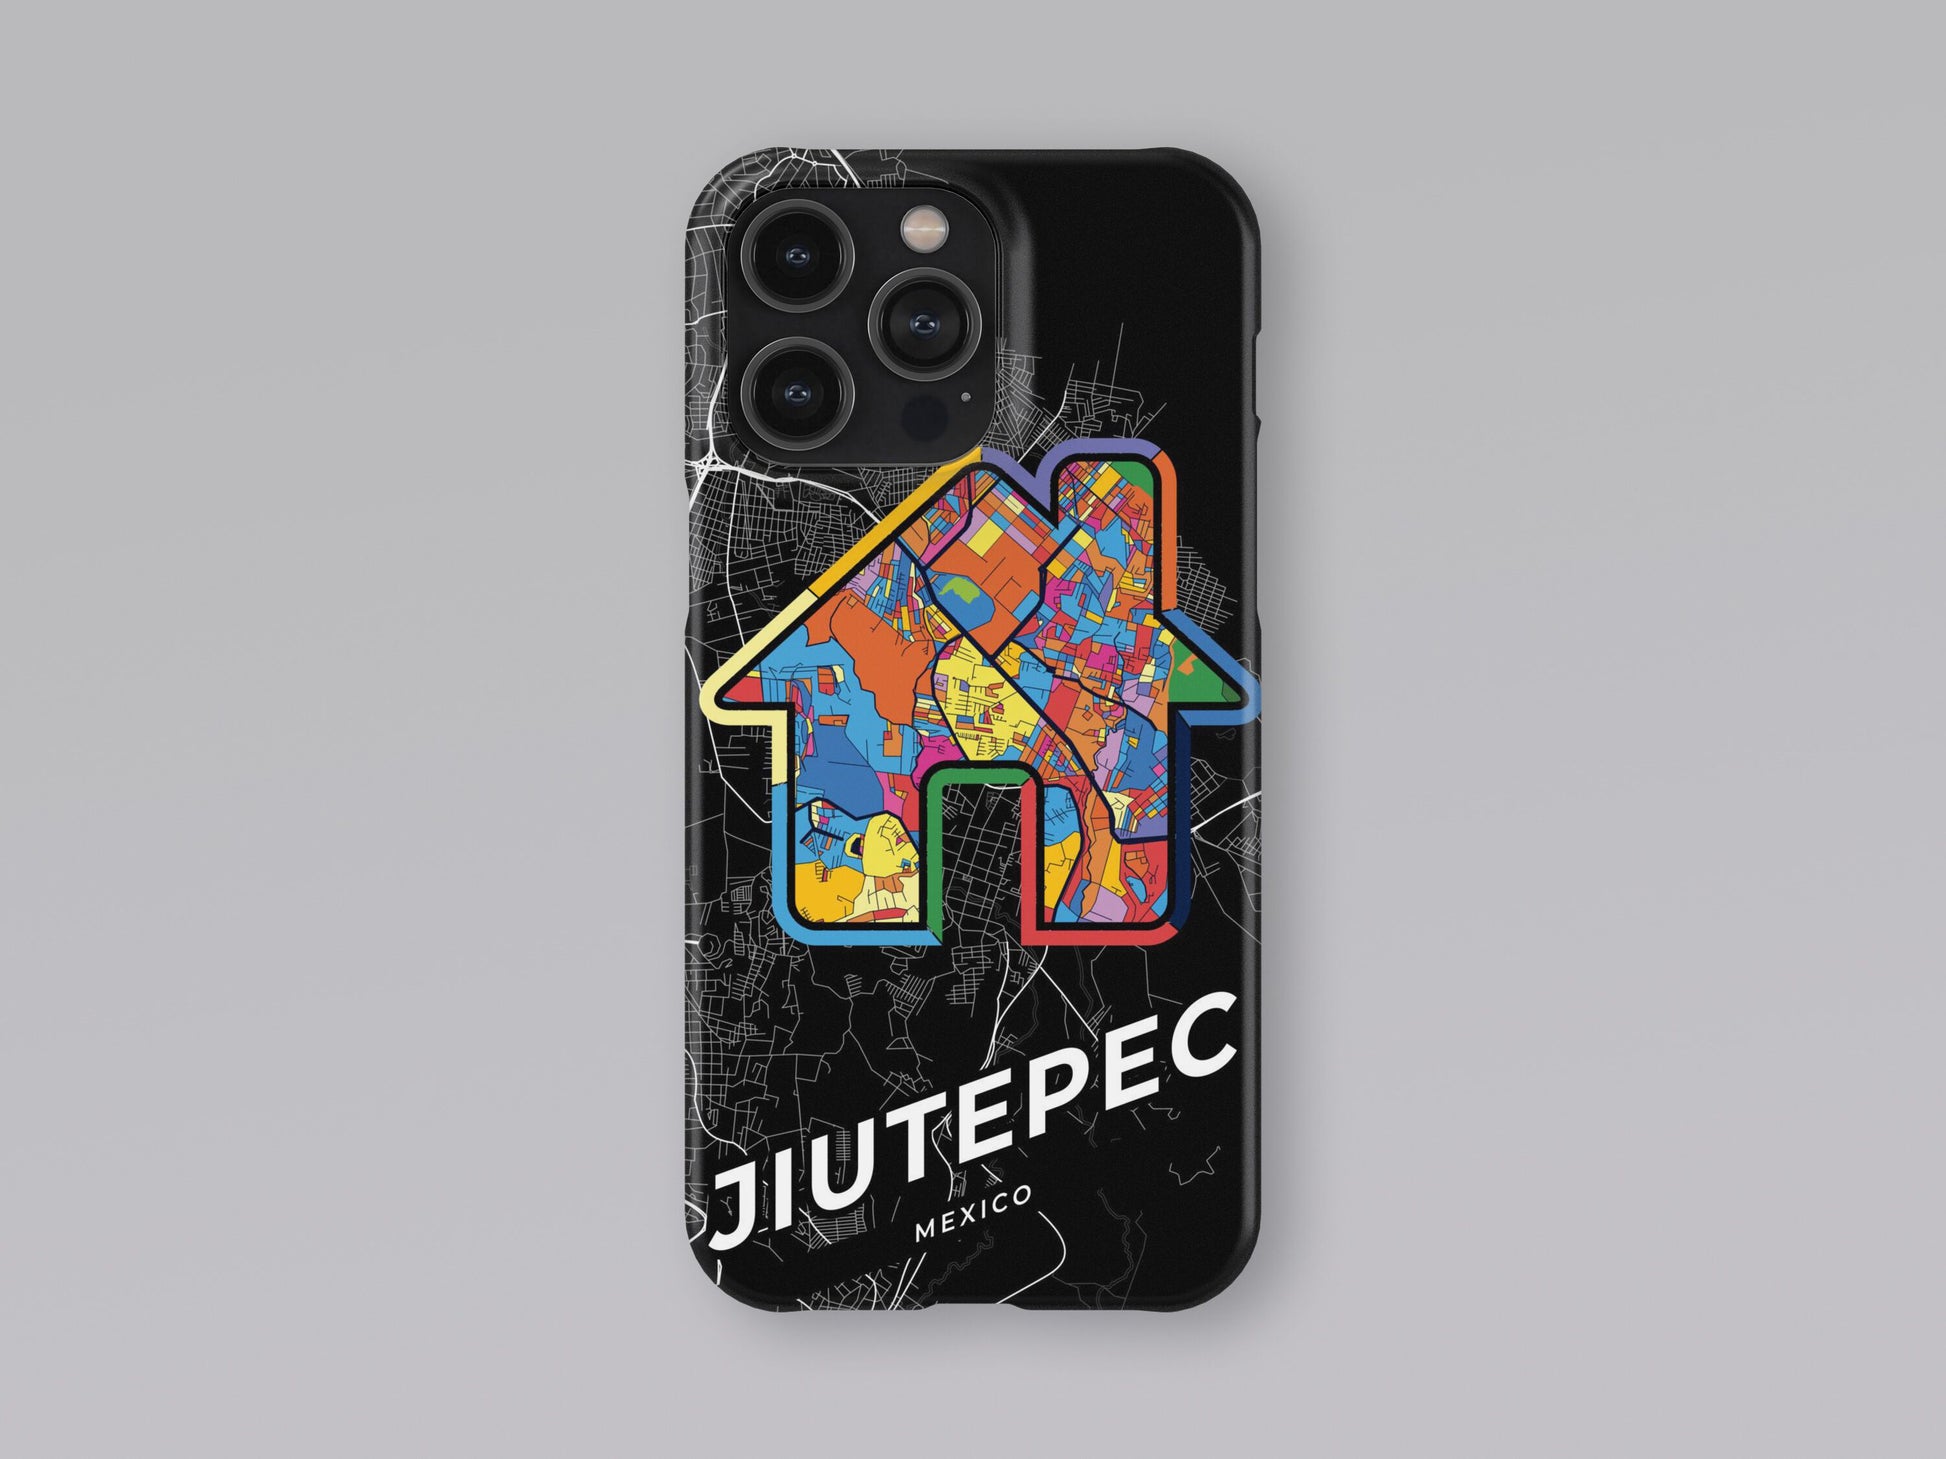 Jiutepec Mexico slim phone case with colorful icon. Birthday, wedding or housewarming gift. Couple match cases. 3